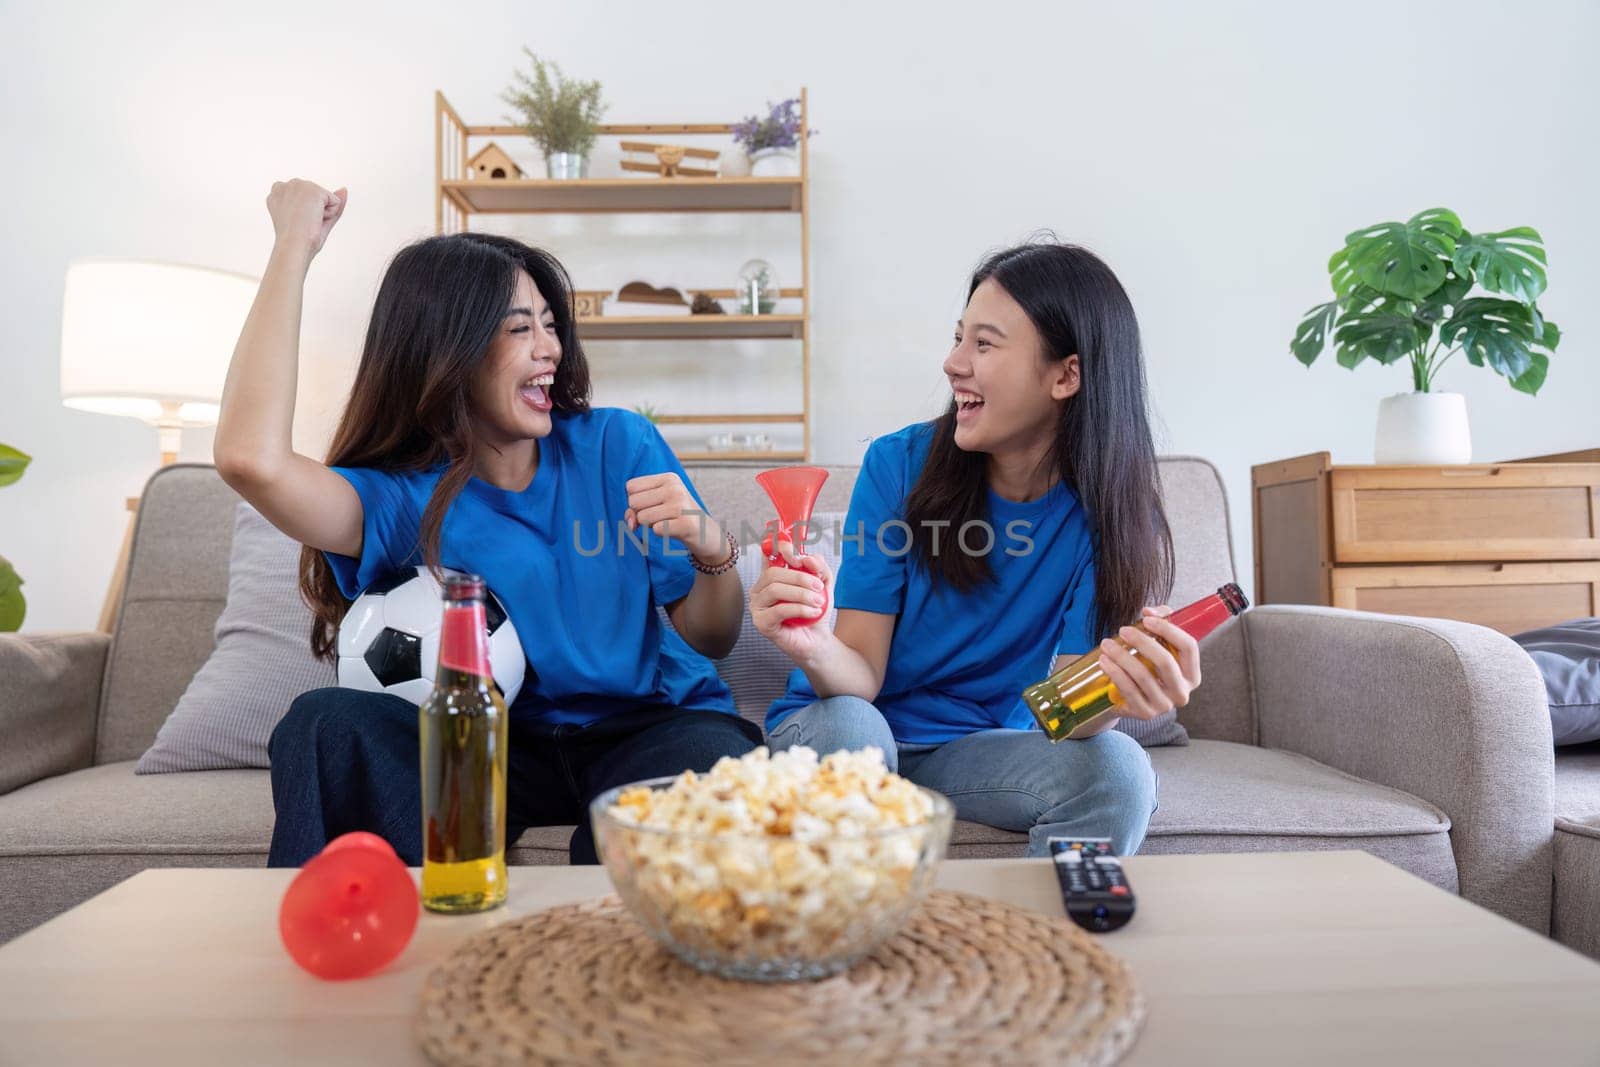 Lesbian couple cheering while watching Euro football match at home with drinks and popcorn. Concept of LGBTQ pride, sports enthusiasm, and celebration by nateemee